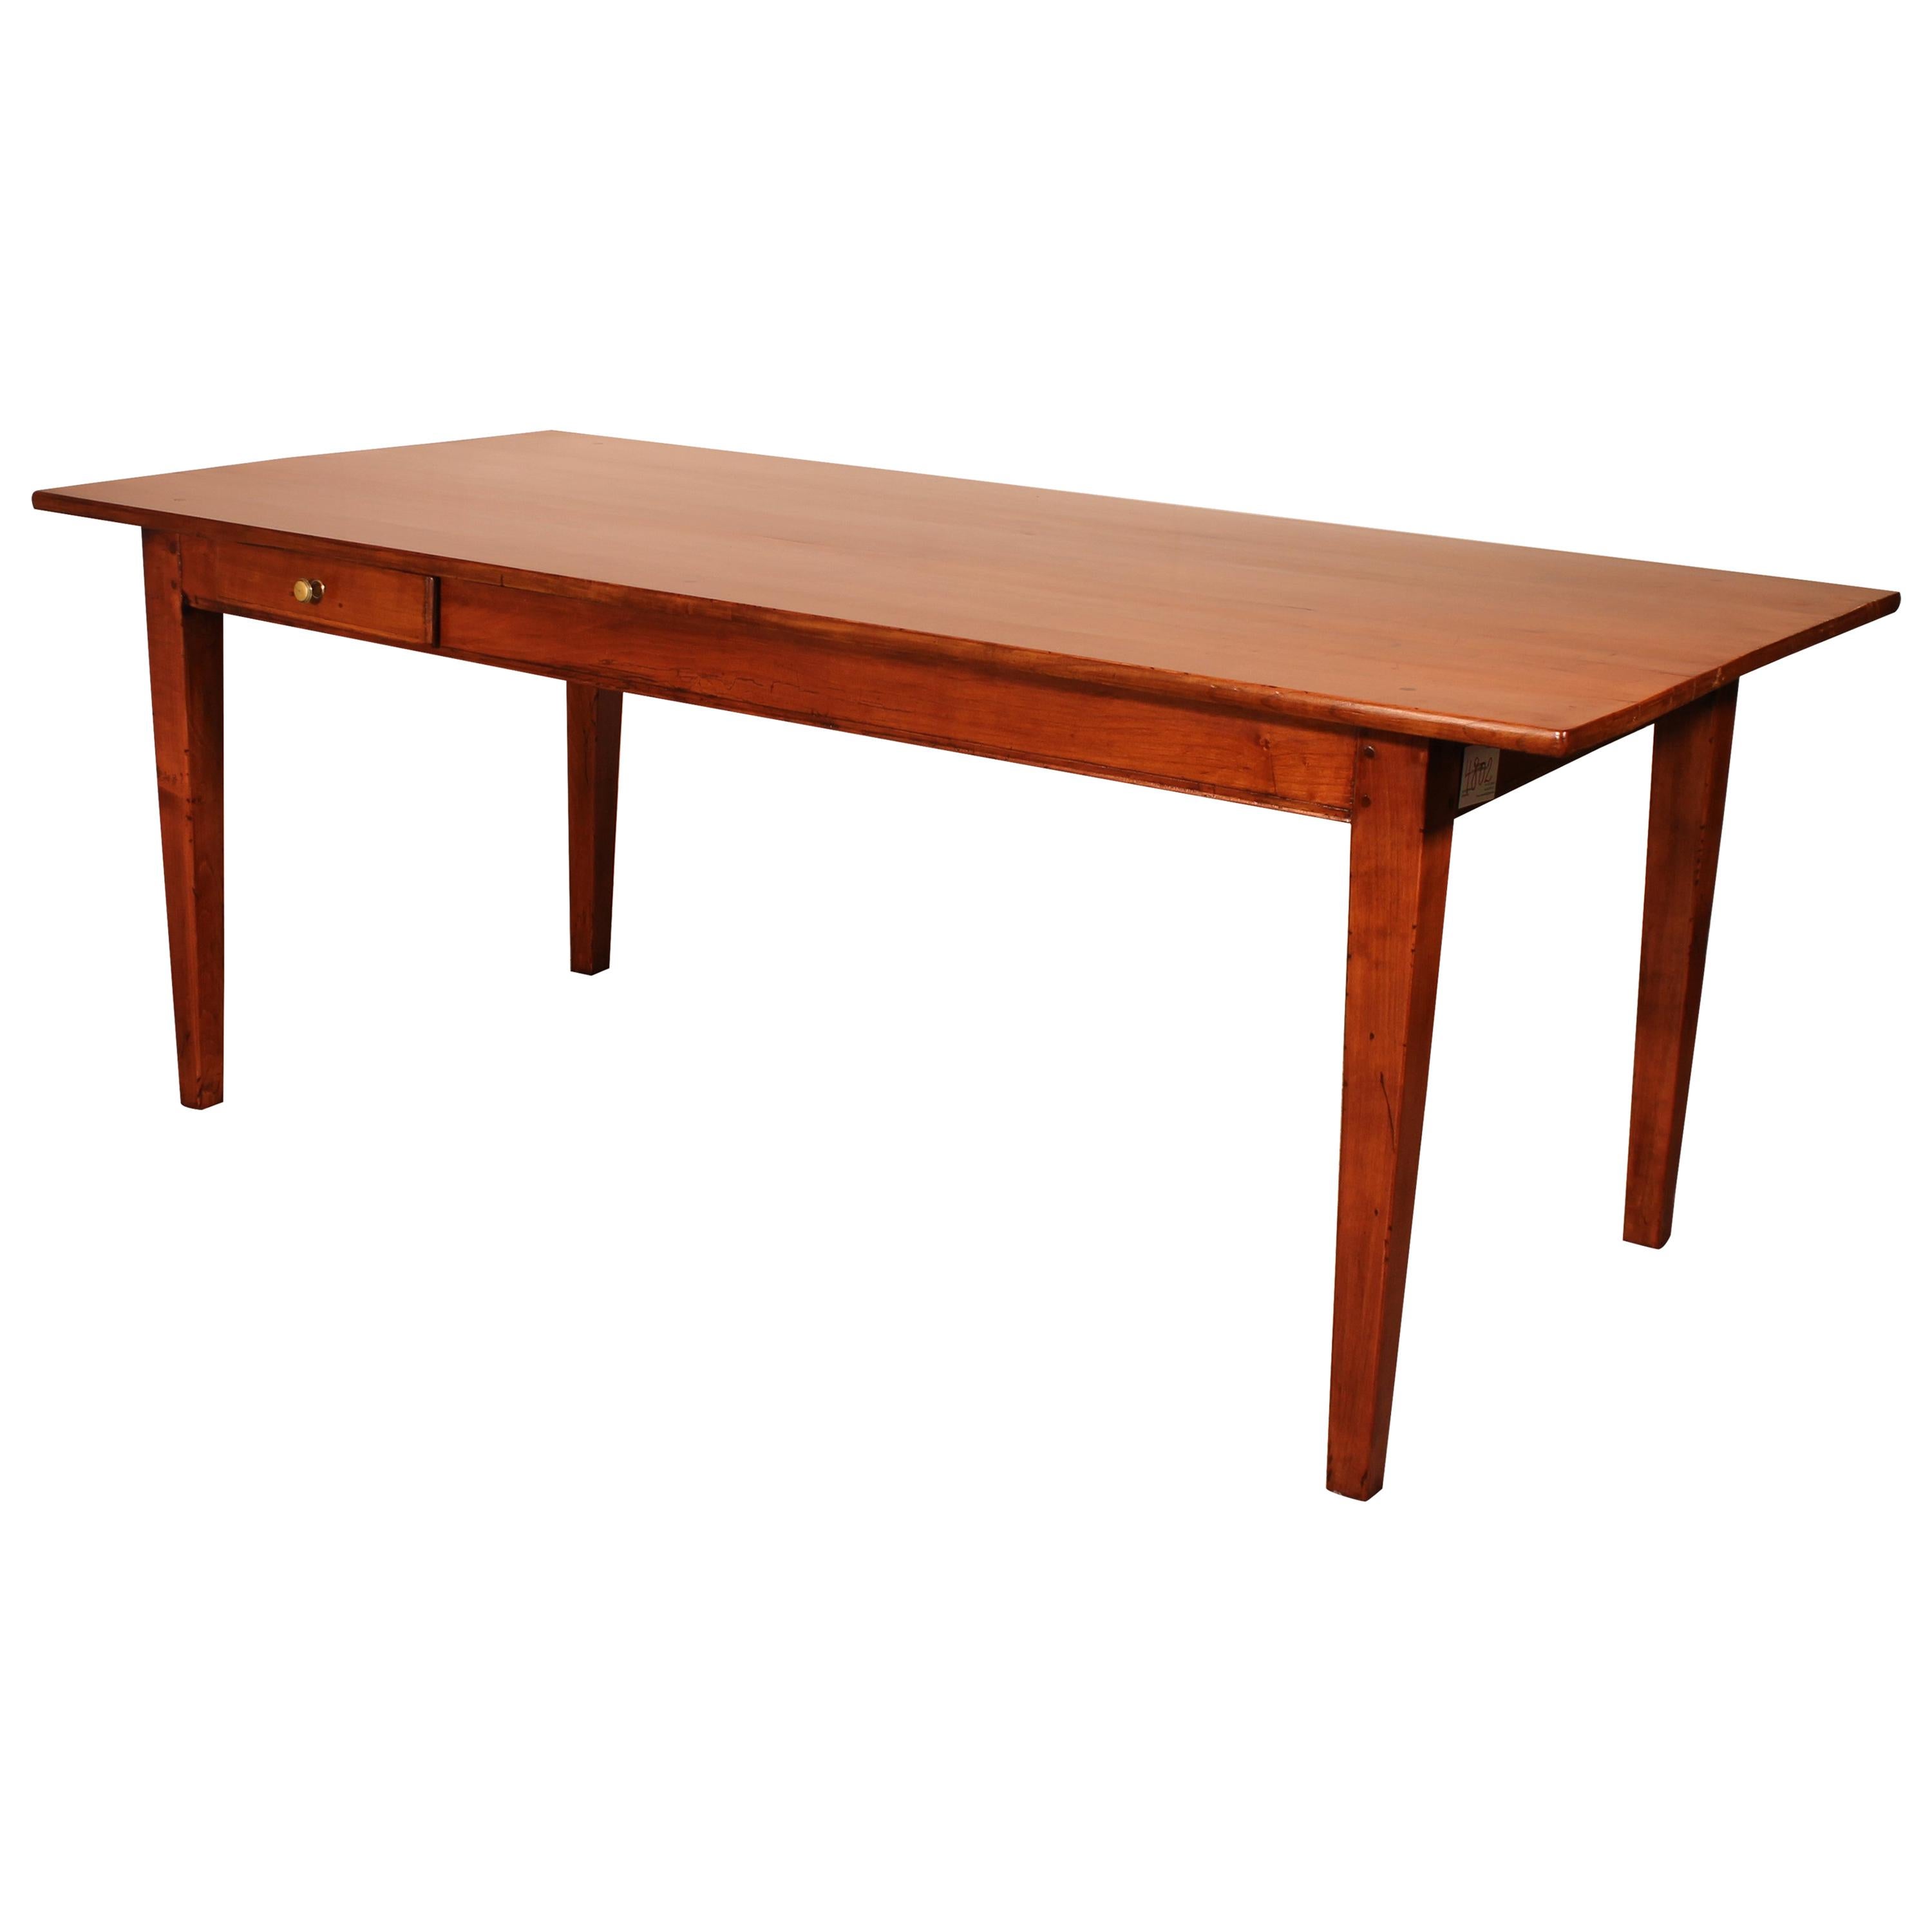 French Refectory Table with Two Drawers from the 19th Century in Cherry Wood-Fra